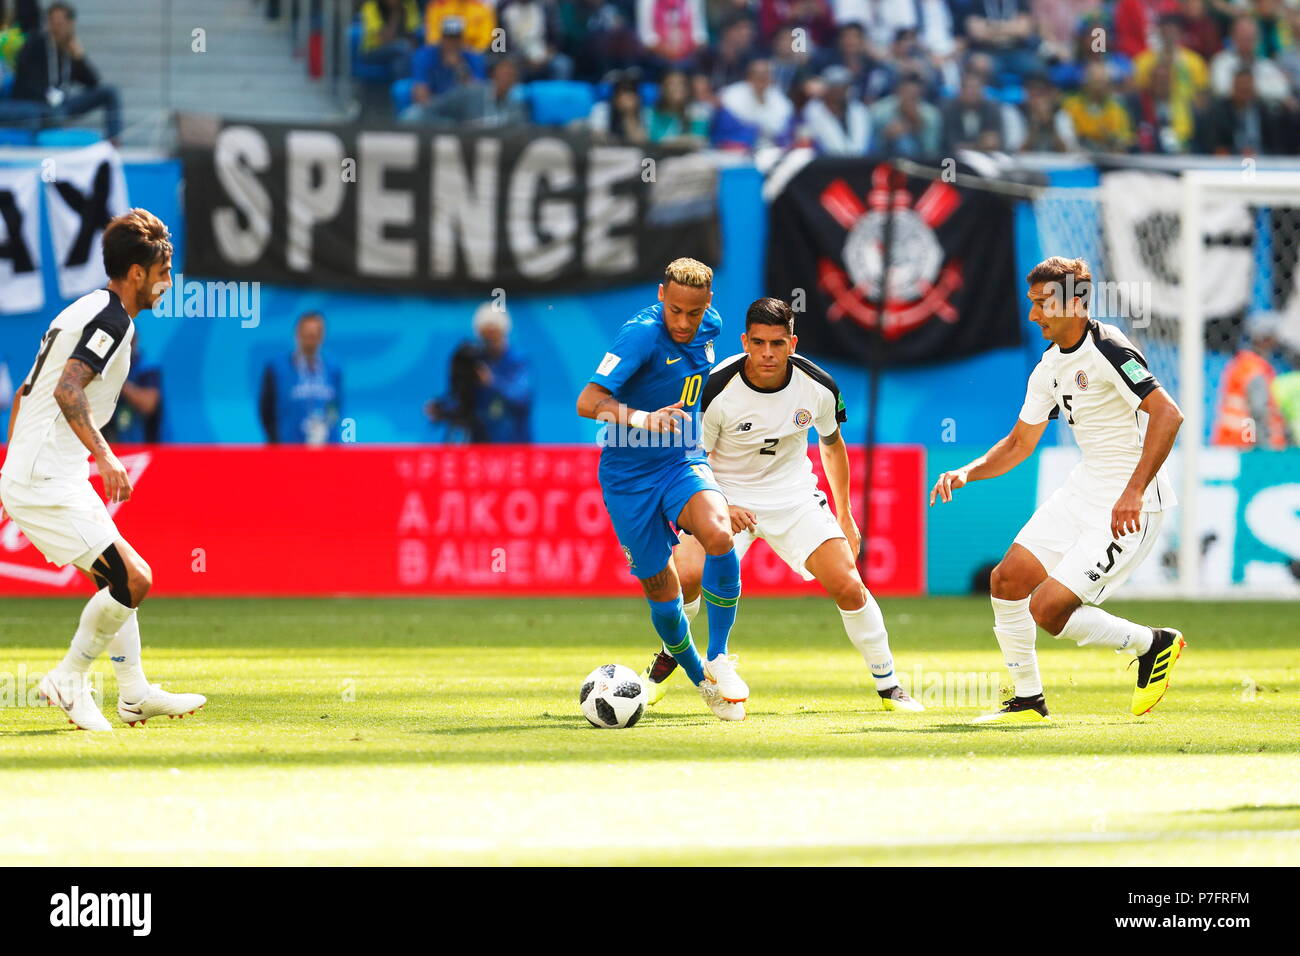 Saint Petersburg, Russia. 22nd June, 2018. (L-R) Bryan Ruiz (CRC), Neymar (BRA), Johnny Acosta, Celso Borges (CRC) Football/Soccer : FIFA World Cup Russia 2018 match between Brazil 2-0 Costa Rica at the Saint Petersburg Stadium in Saint Petersburg, Russia . Credit: Mutsu KAWAMORI/AFLO/Alamy Live News Stock Photo